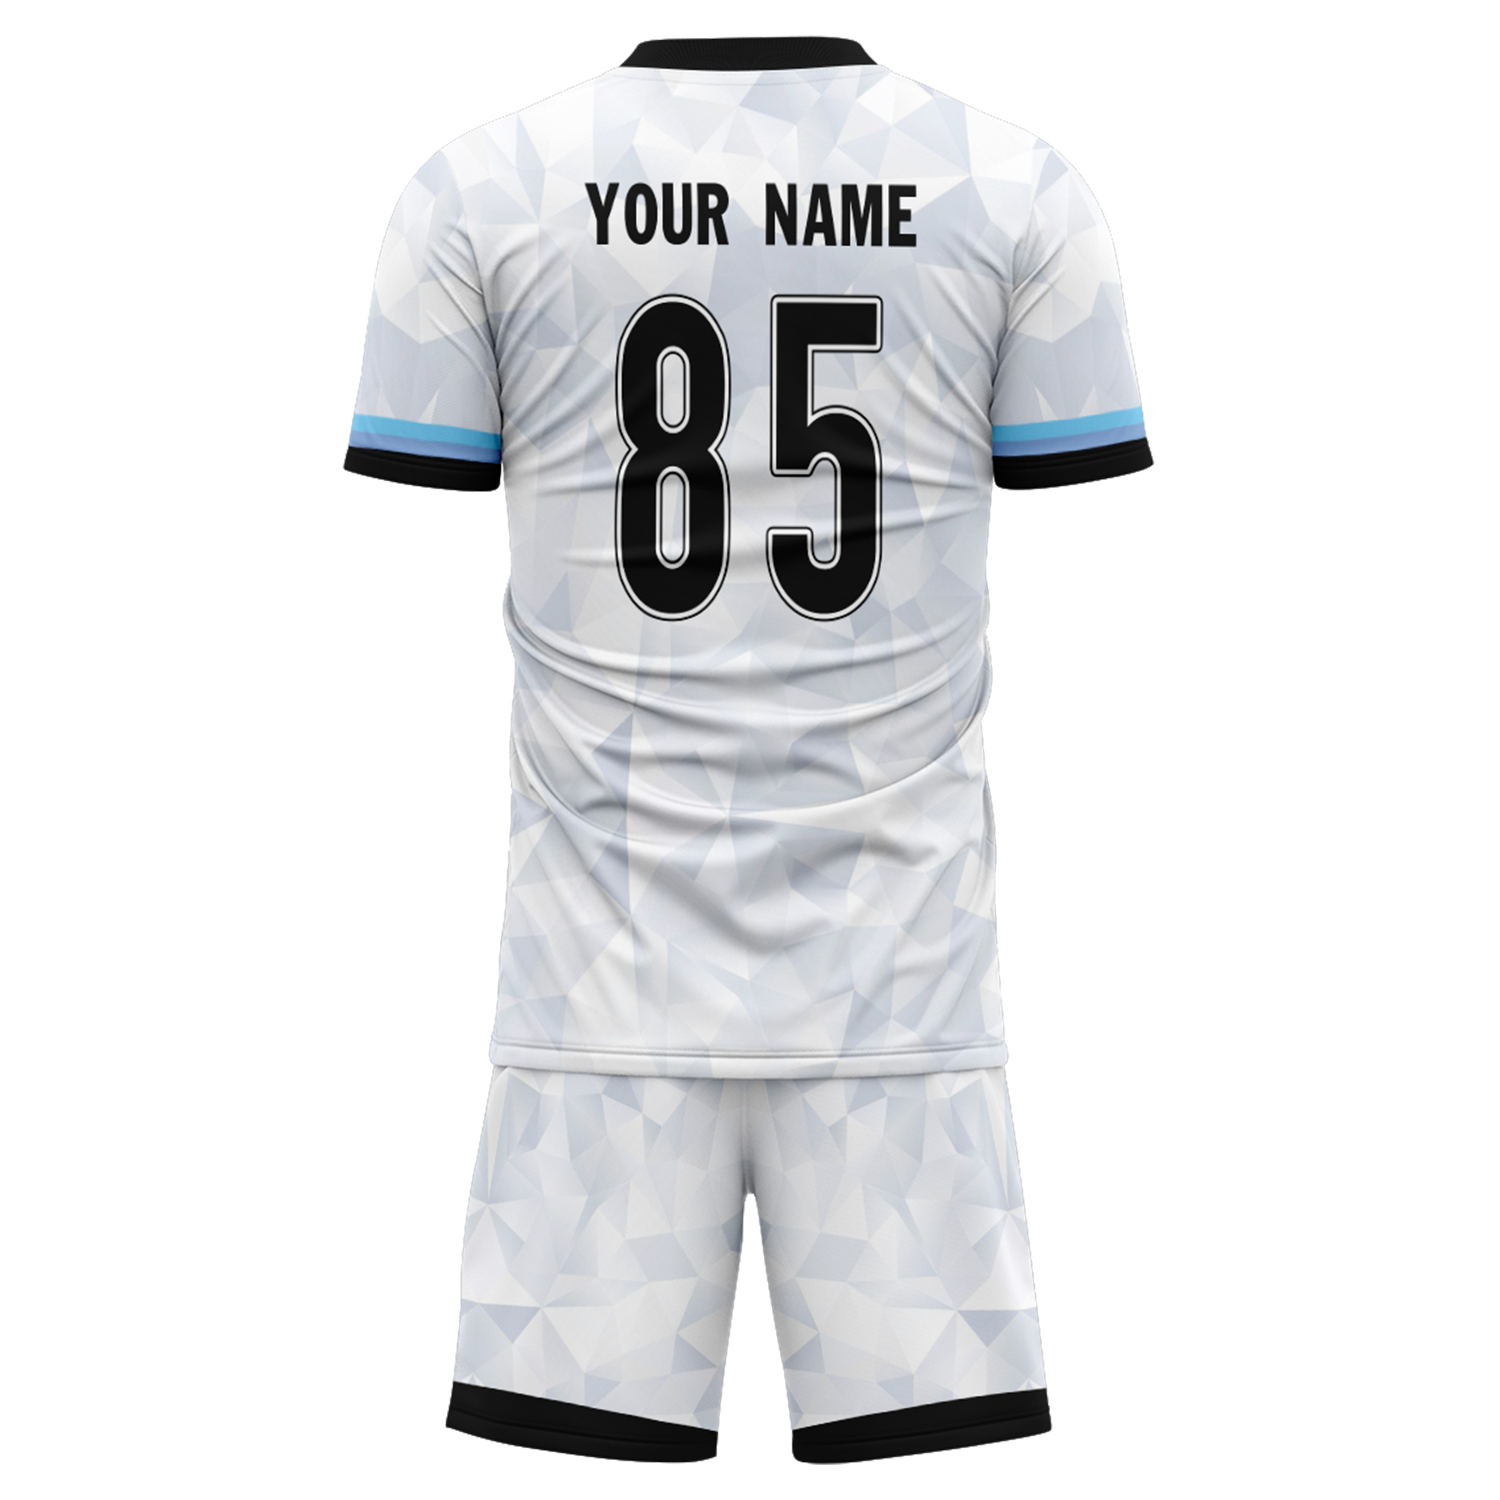 Custom Germany Team Football Suits Personalized Design Print on Demand Soccer Jerseys